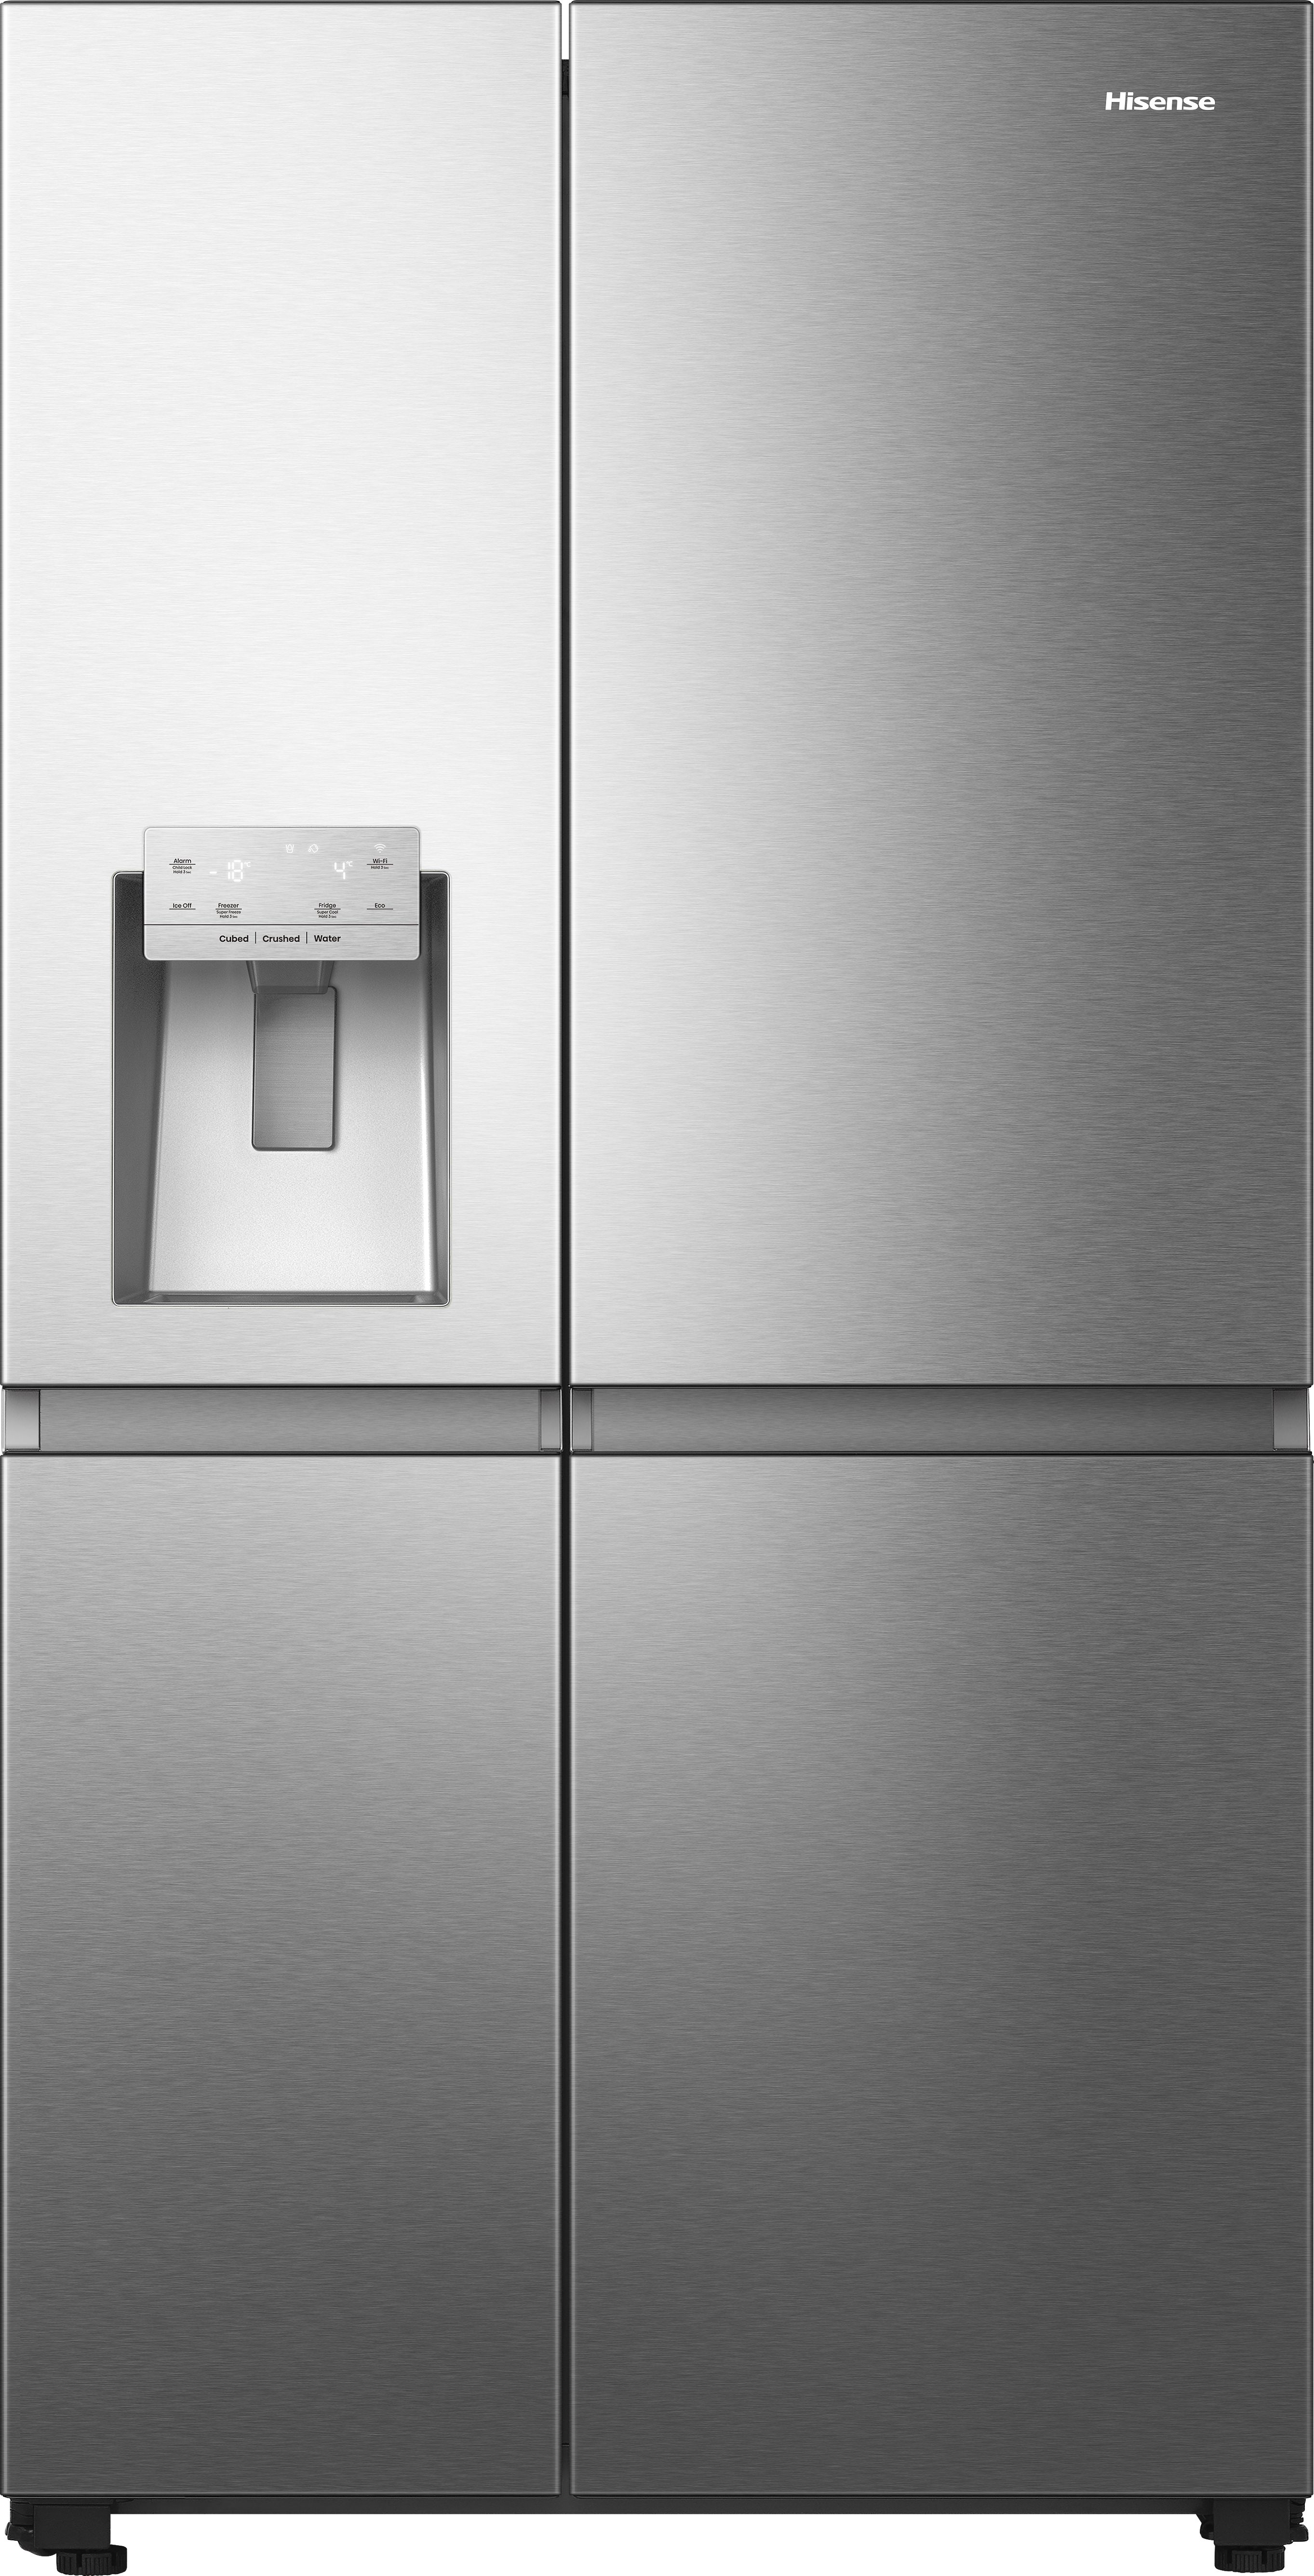 Hisense Pureflat Infinite RS818N4TIC Wifi Connected Non-Plumbed Total No Frost American Fridge Freezer - Stainless Steel - C Rated, Stainless Steel